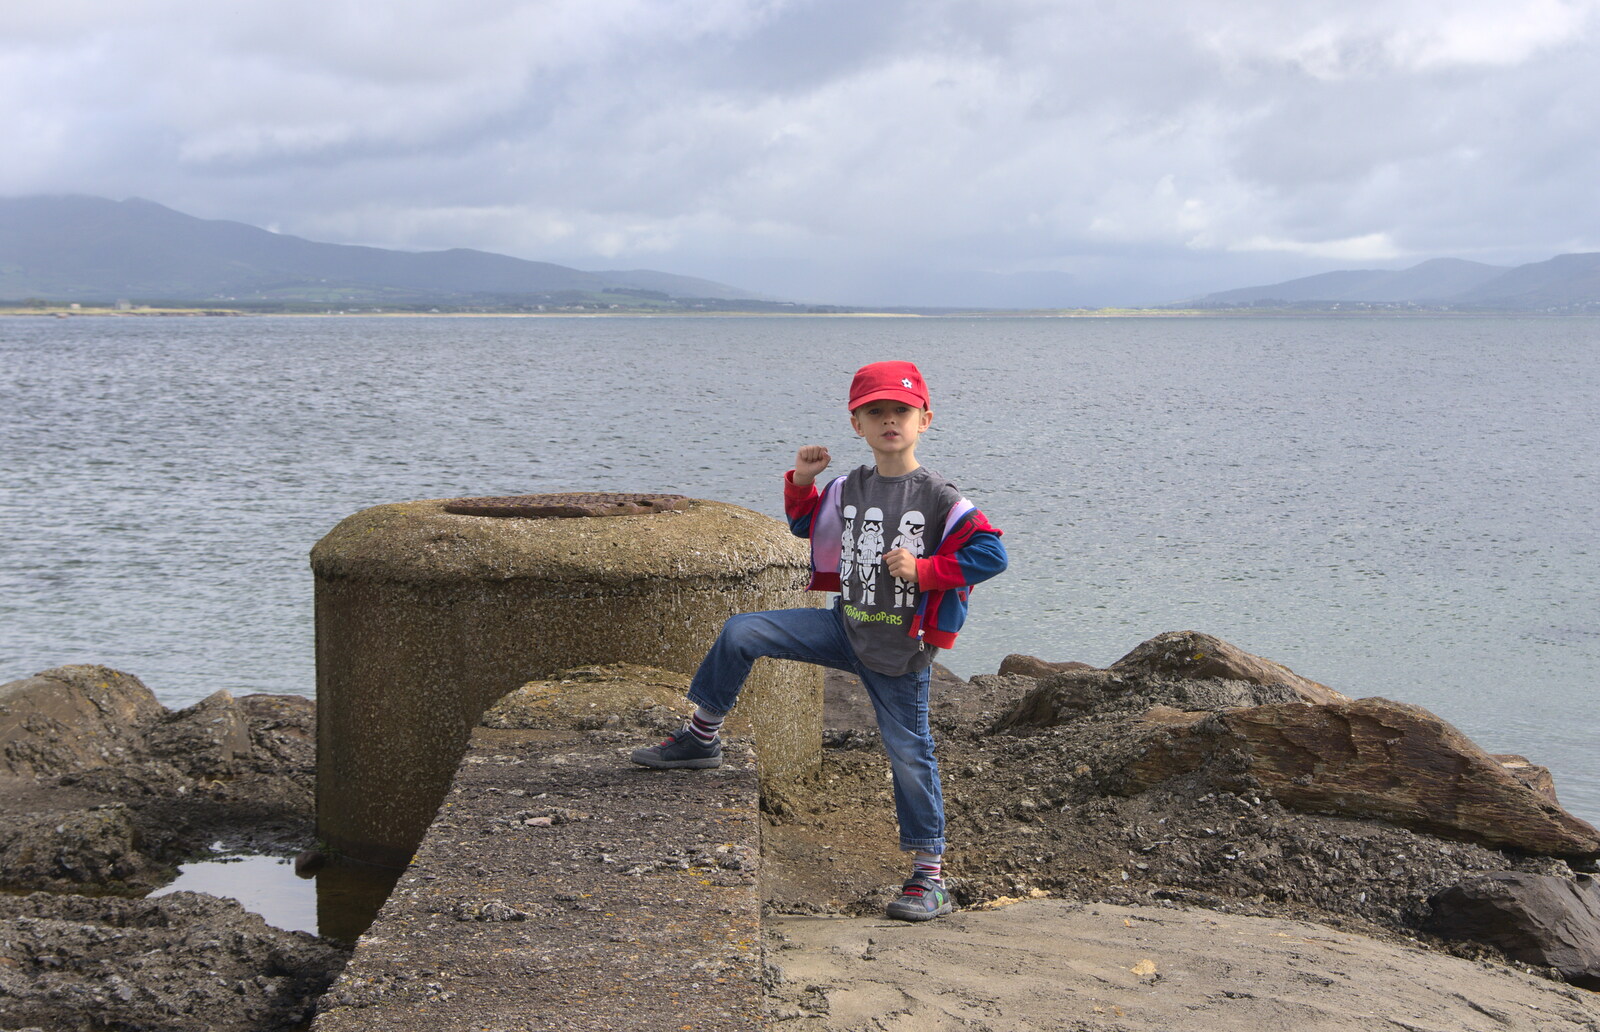 Harry poses on some breakwater from Baile an Sceilg to An tSnaidhme, Co. Kerry, Ireland - 31st July 2017